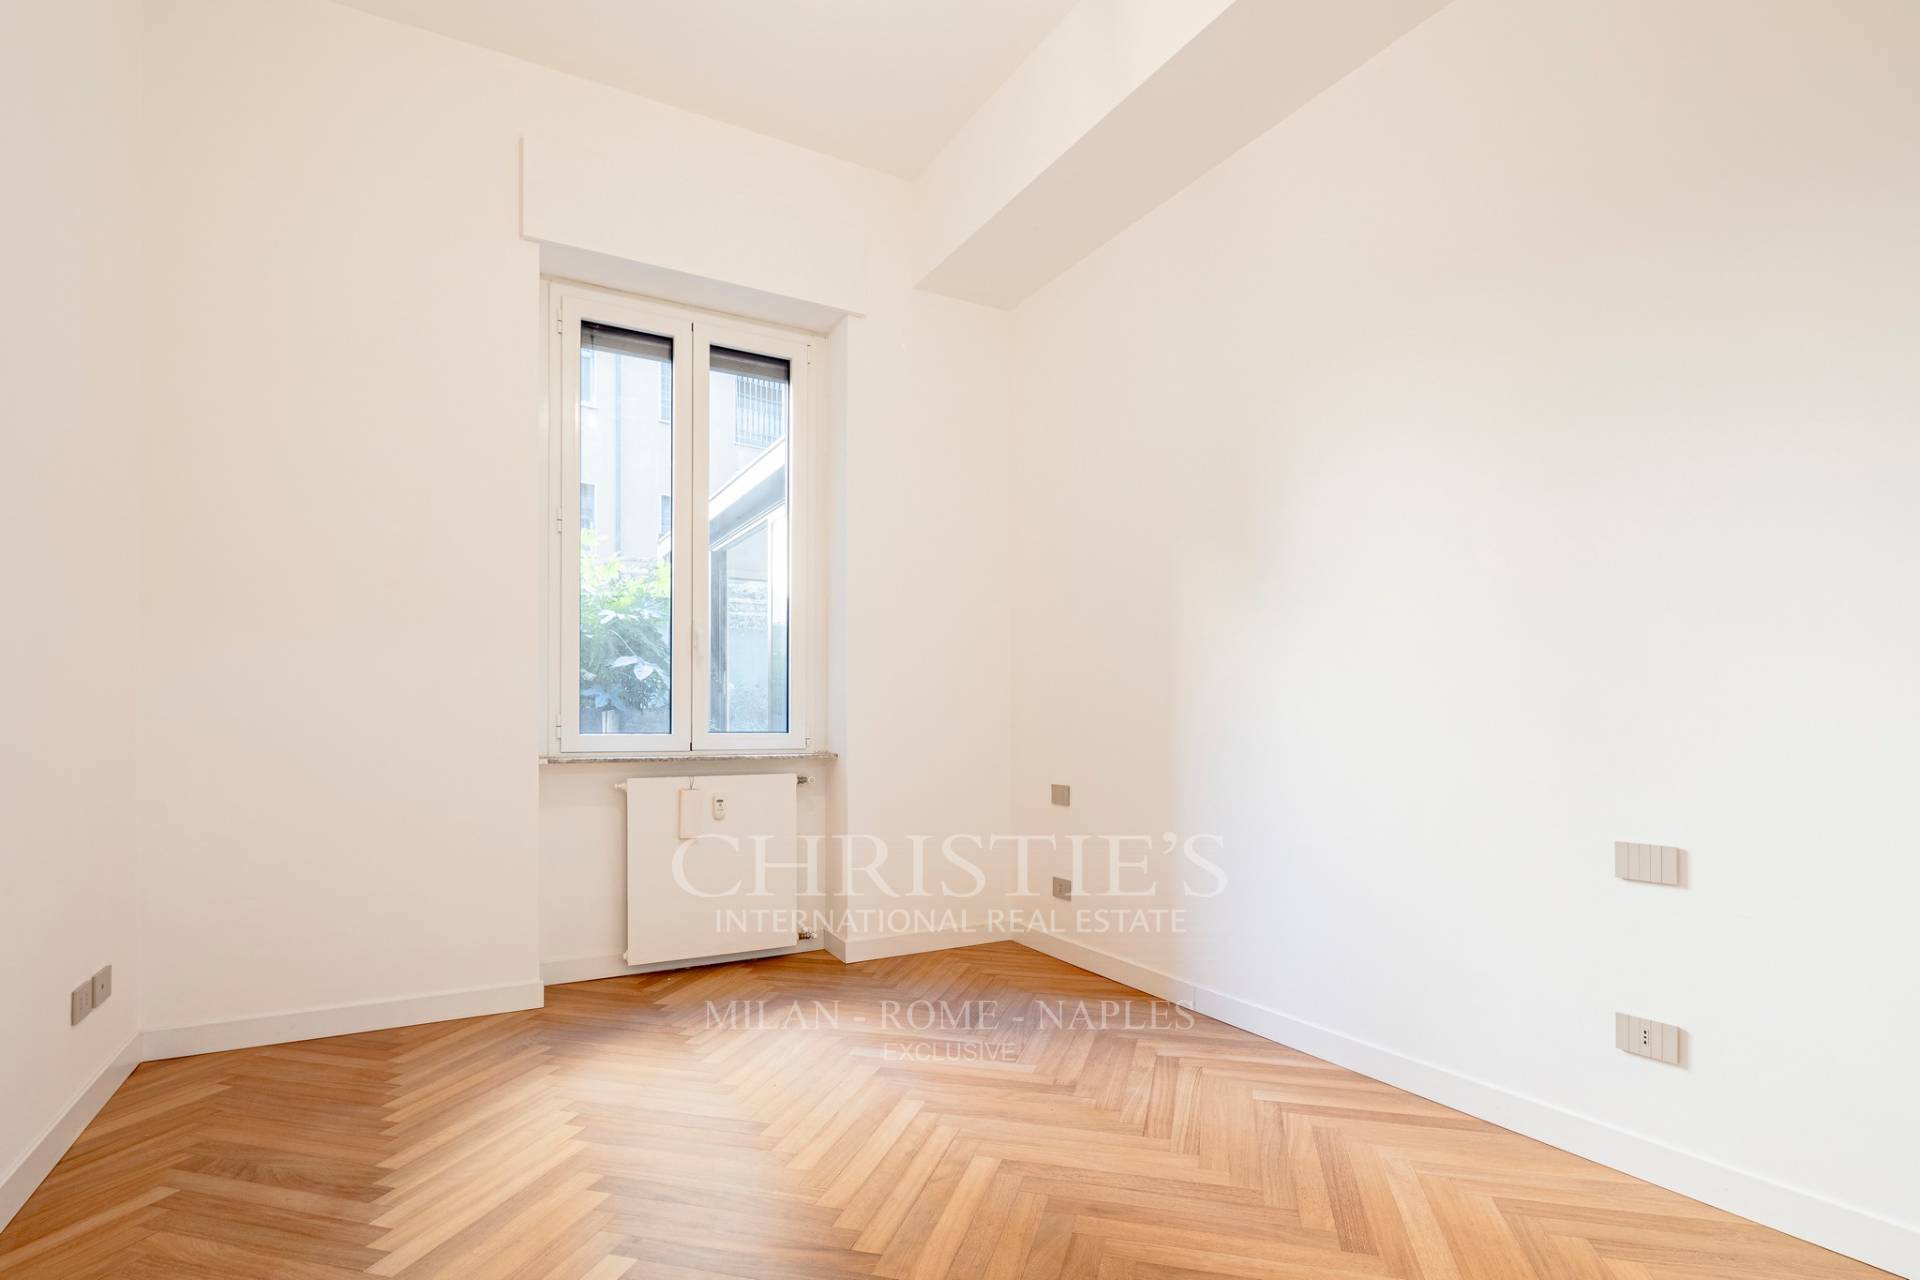 picture of Apartment With Large Terrace Next To The Indro Montanelli Public Gardens